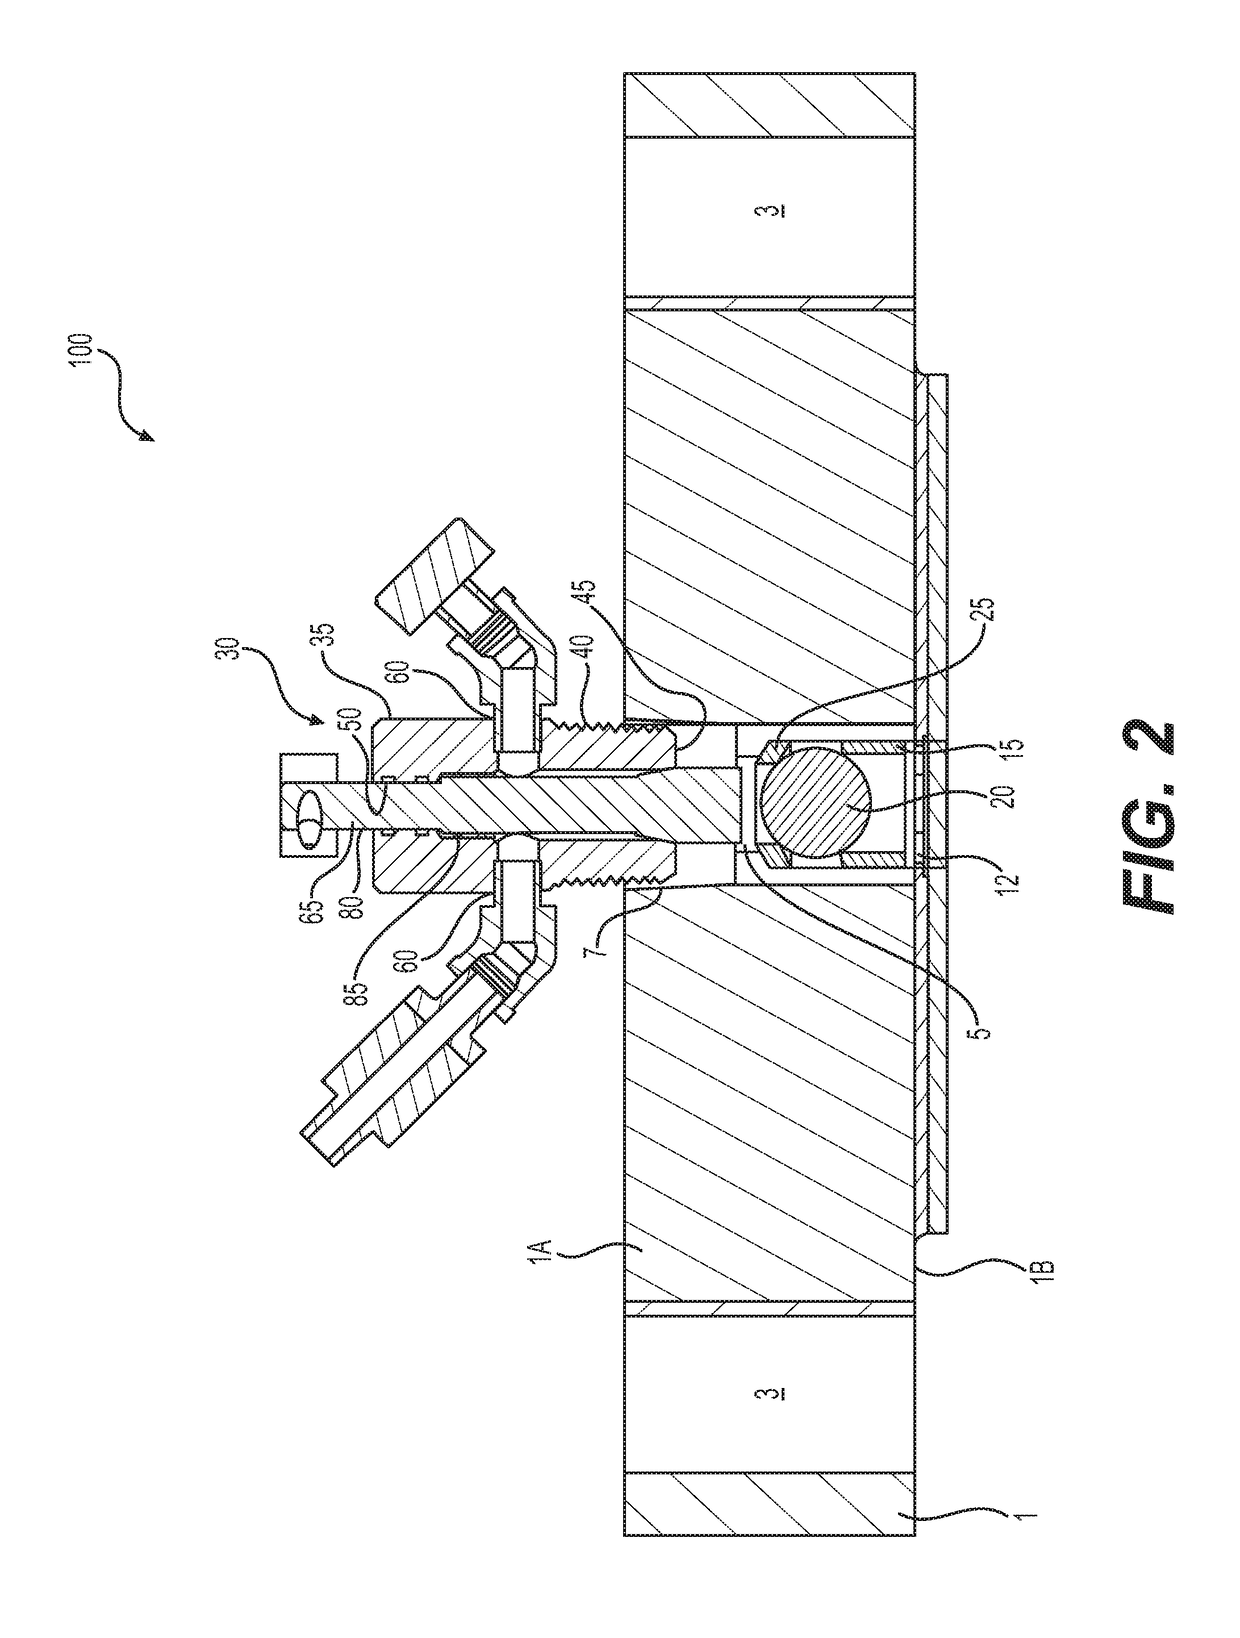 System and method for measuring pressure and removing fluid from behind a flange of pipeline